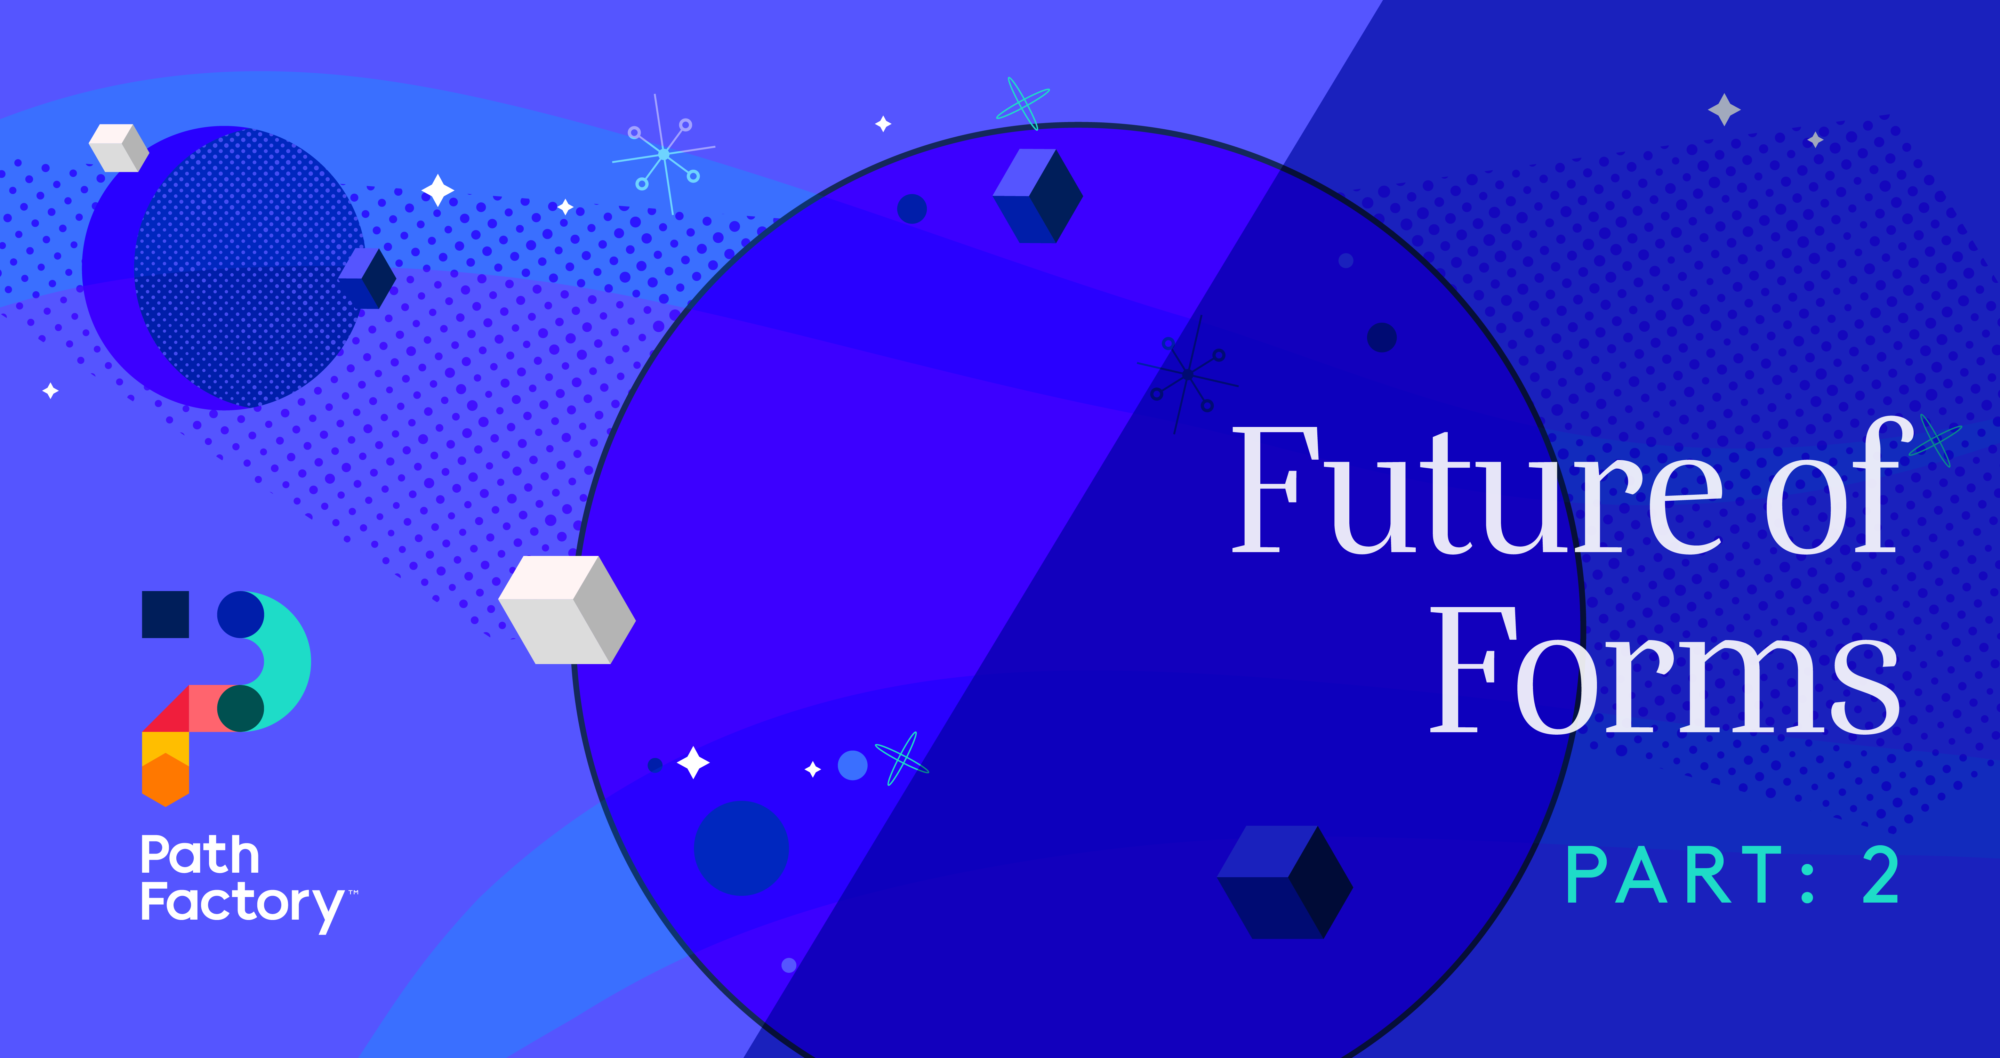 Future of Forms, part 2, Decorative Blue circles and White cubes on a blue background with a PathFactory logo on the bottom left